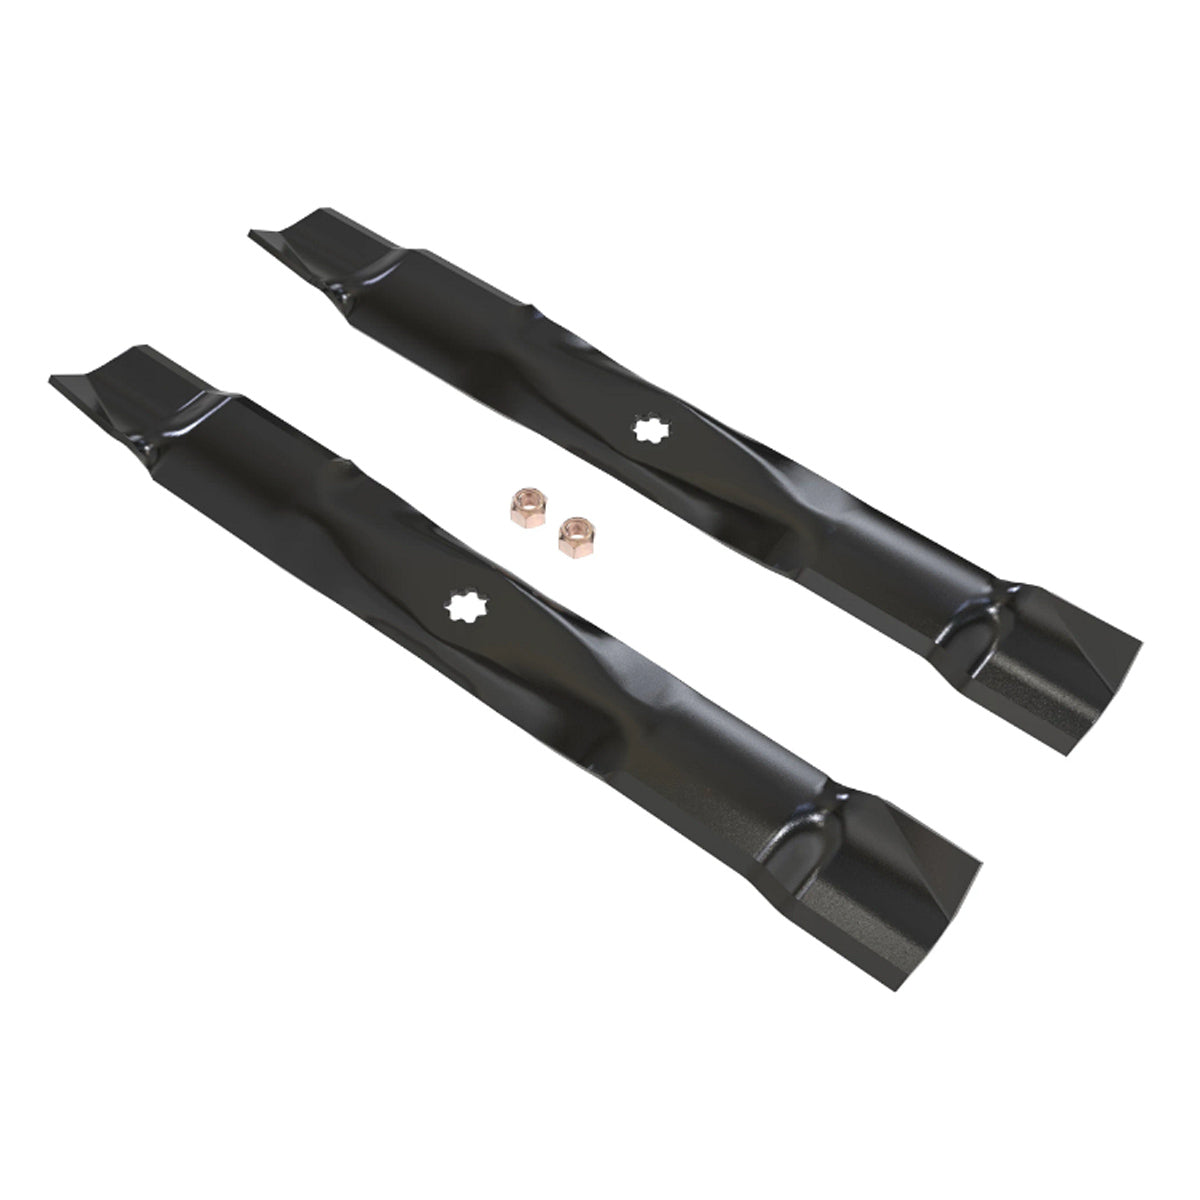 John Deere Lawn Mower Blades (Bagging) for 300, Gt, Gx, Lt, Lx Select & Front-Mount Series with 38" Deck - AM141041